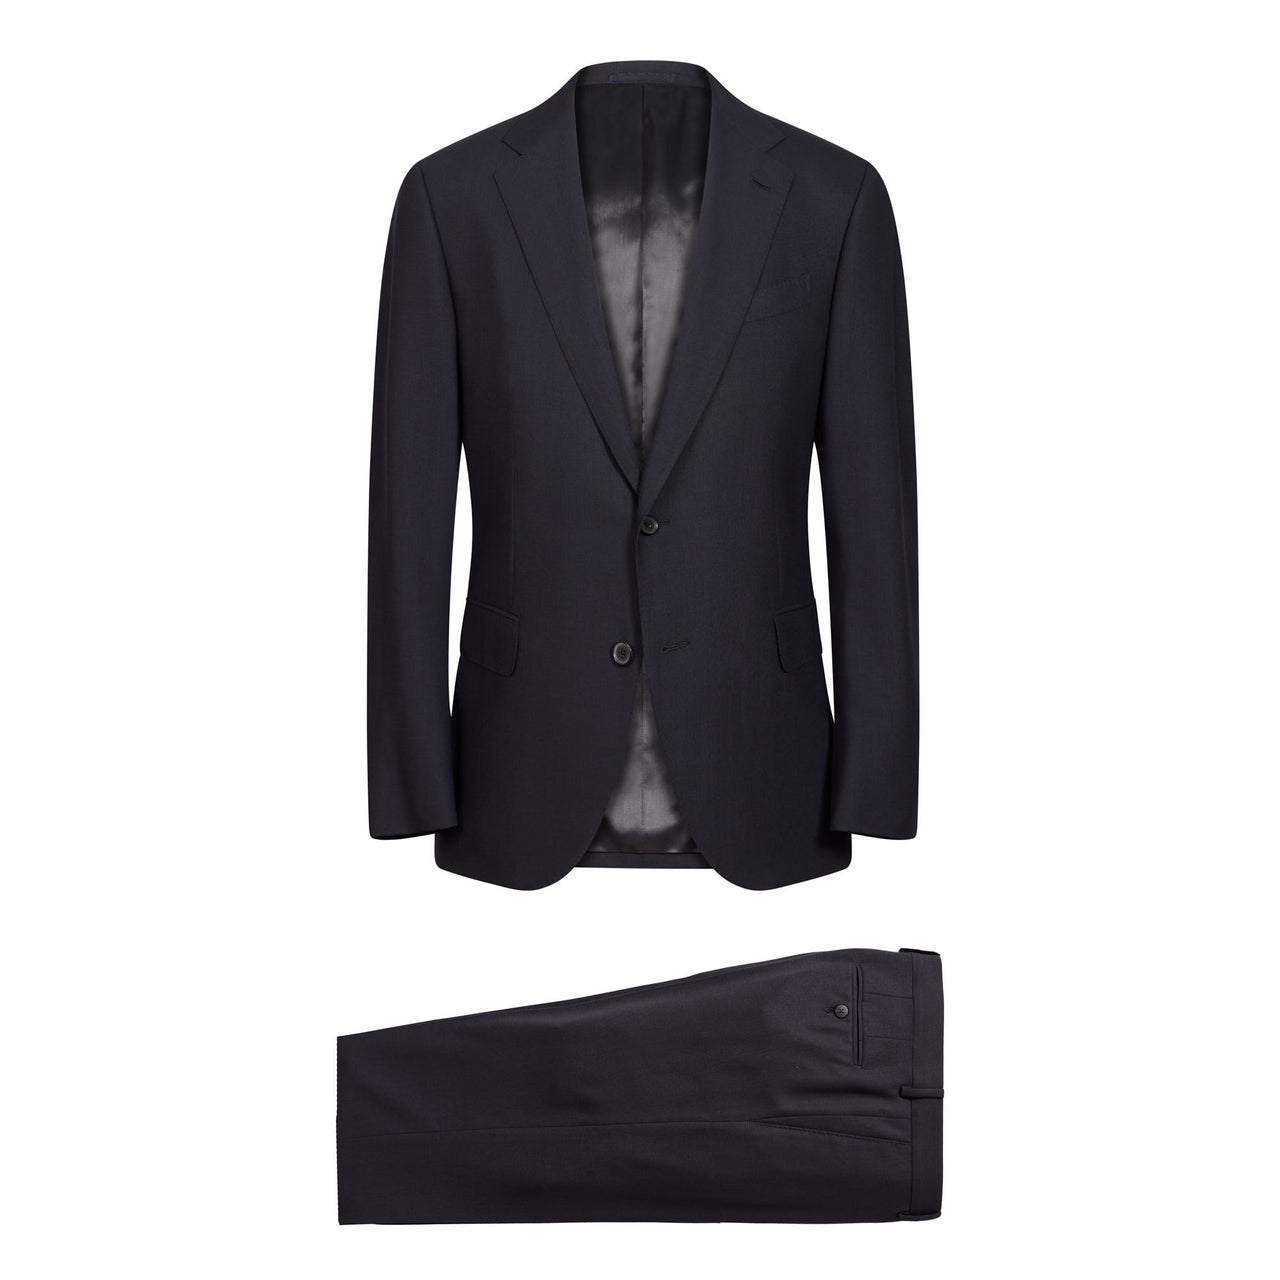 HENRY SARTORIAL X CARUSO Norma 2 Button Single Breasted Wool Suit DARK CHARCOAL